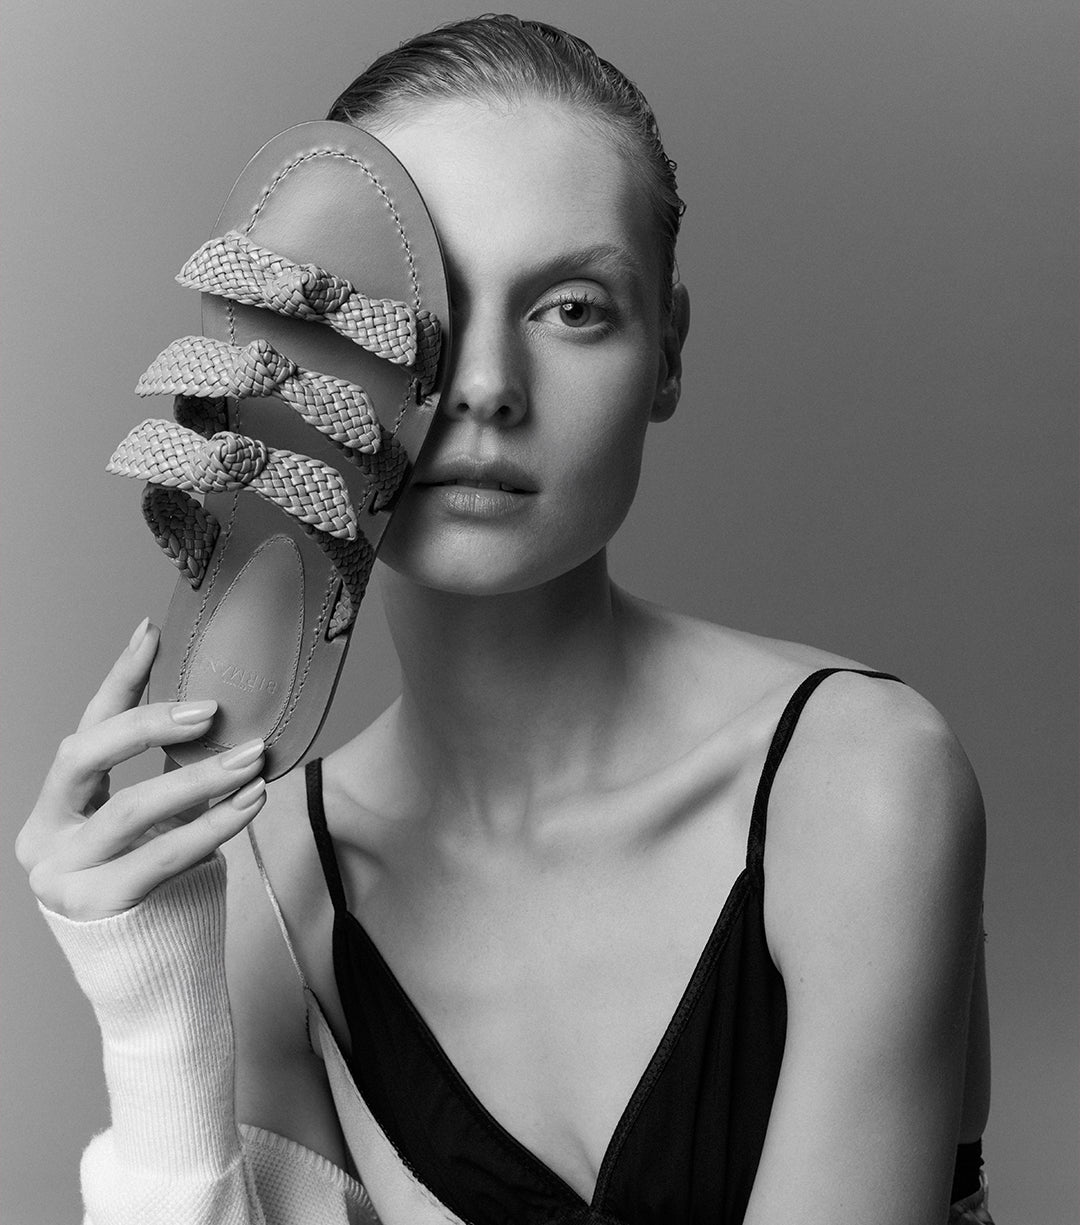 A striking black and white portrait of a woman holding the new Braided Lolita Flat, capturing the allure of timeless fashion